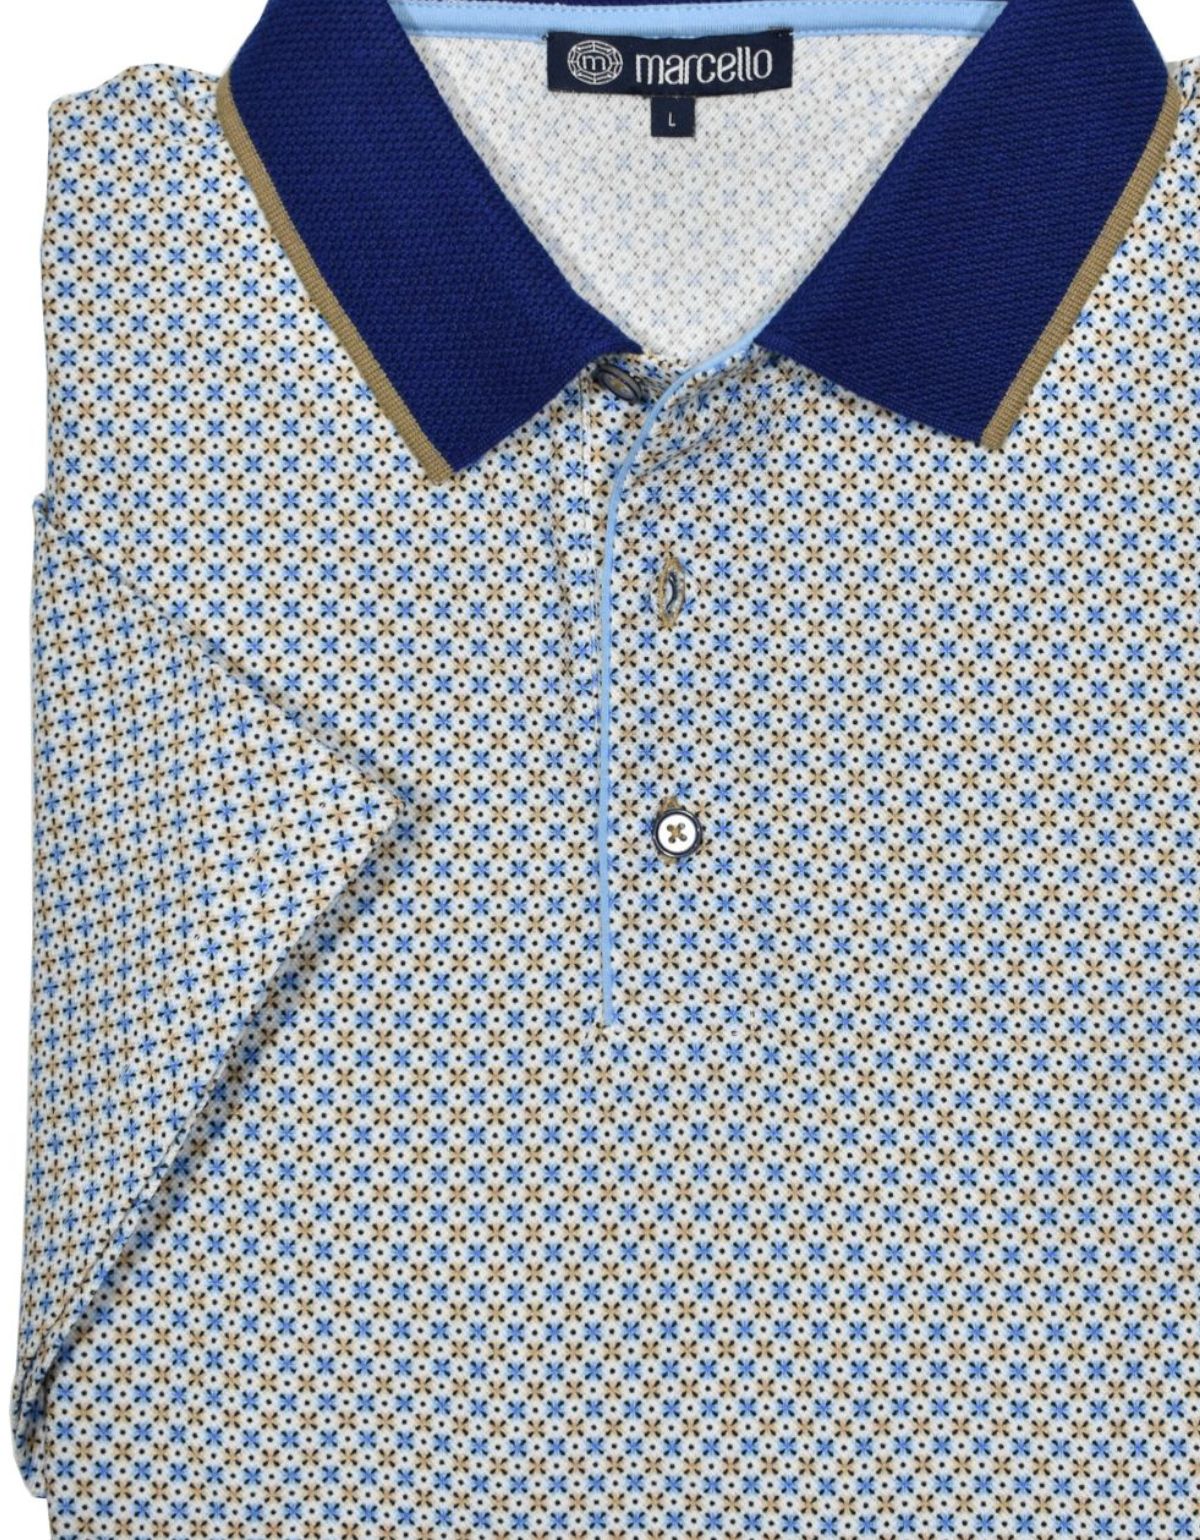 This ultra soft cotton pique polo looks timeless and feels lightweight. Its fine circular  print blue and tan pattern, contrast trim fabric, open sleeves and custom buttons make it unique and stylish. Enjoy its classic fit and timeless look.